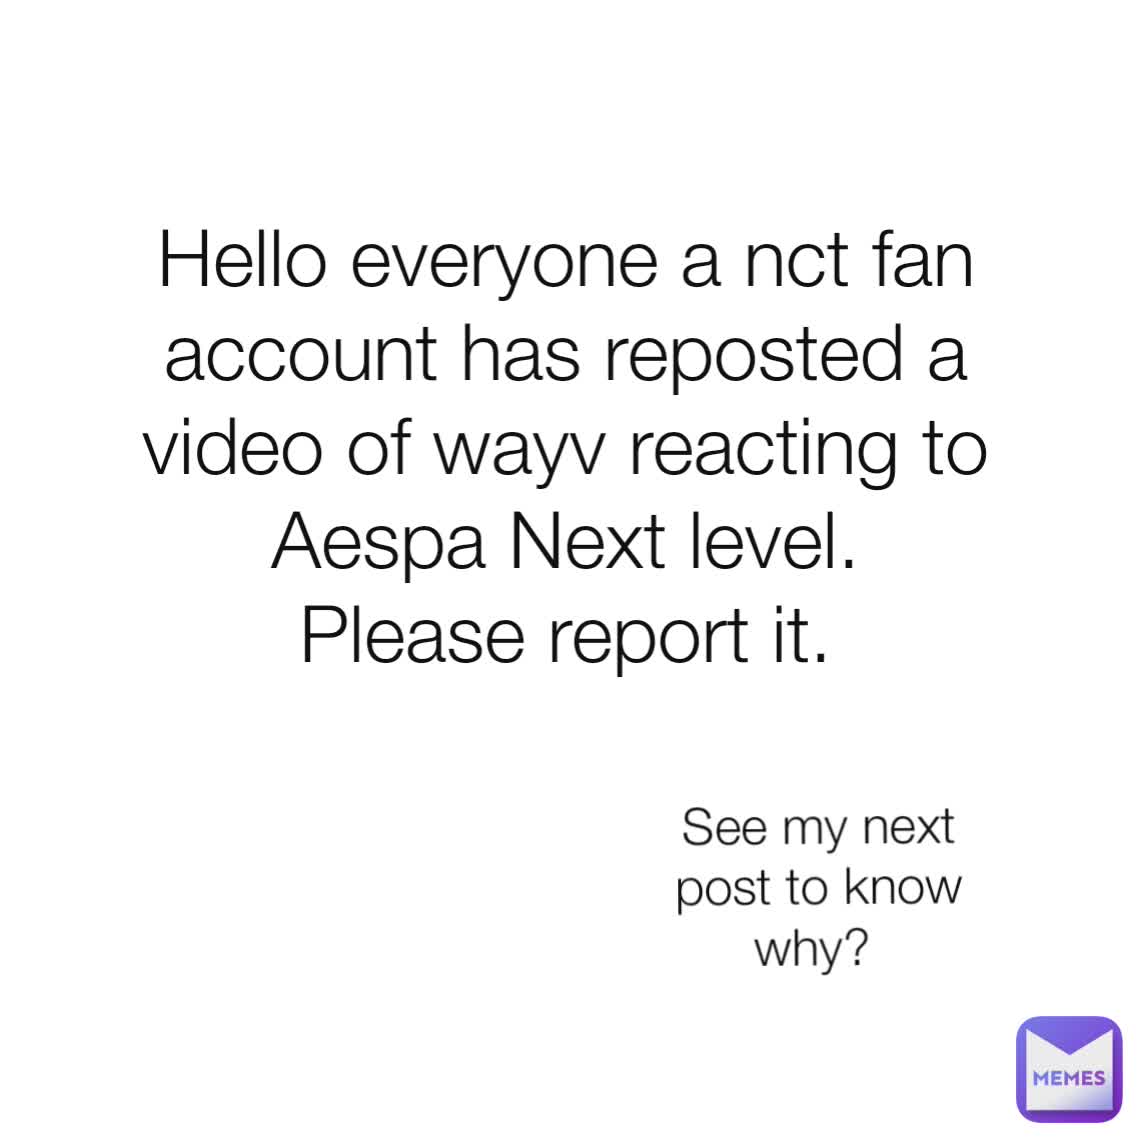 Hello everyone a nct fan account has reposted a video of wayv reacting to Aespa Next level.
Please report it.
 See my next post to know why? 